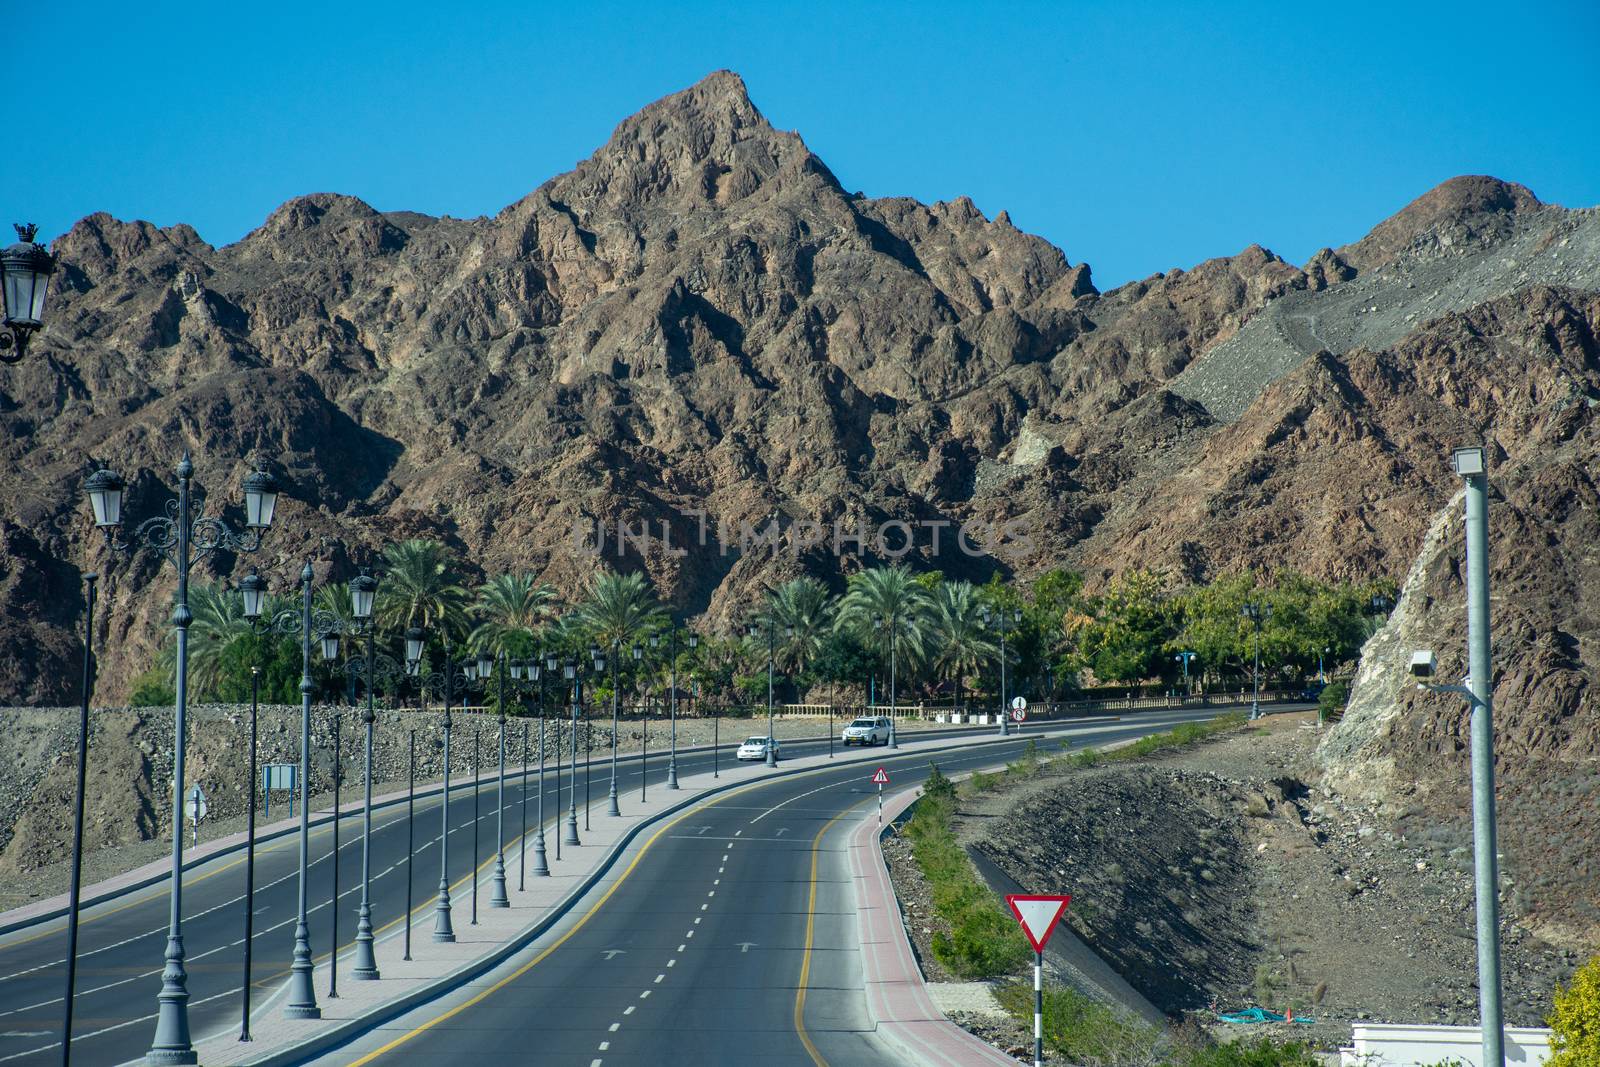 "Muscat, Muscat/Oman - 12/17/2019: Mountain highway road with rocky mountains and blue sky in Muscat, Oman near Muttrah Souq and Old Town. "